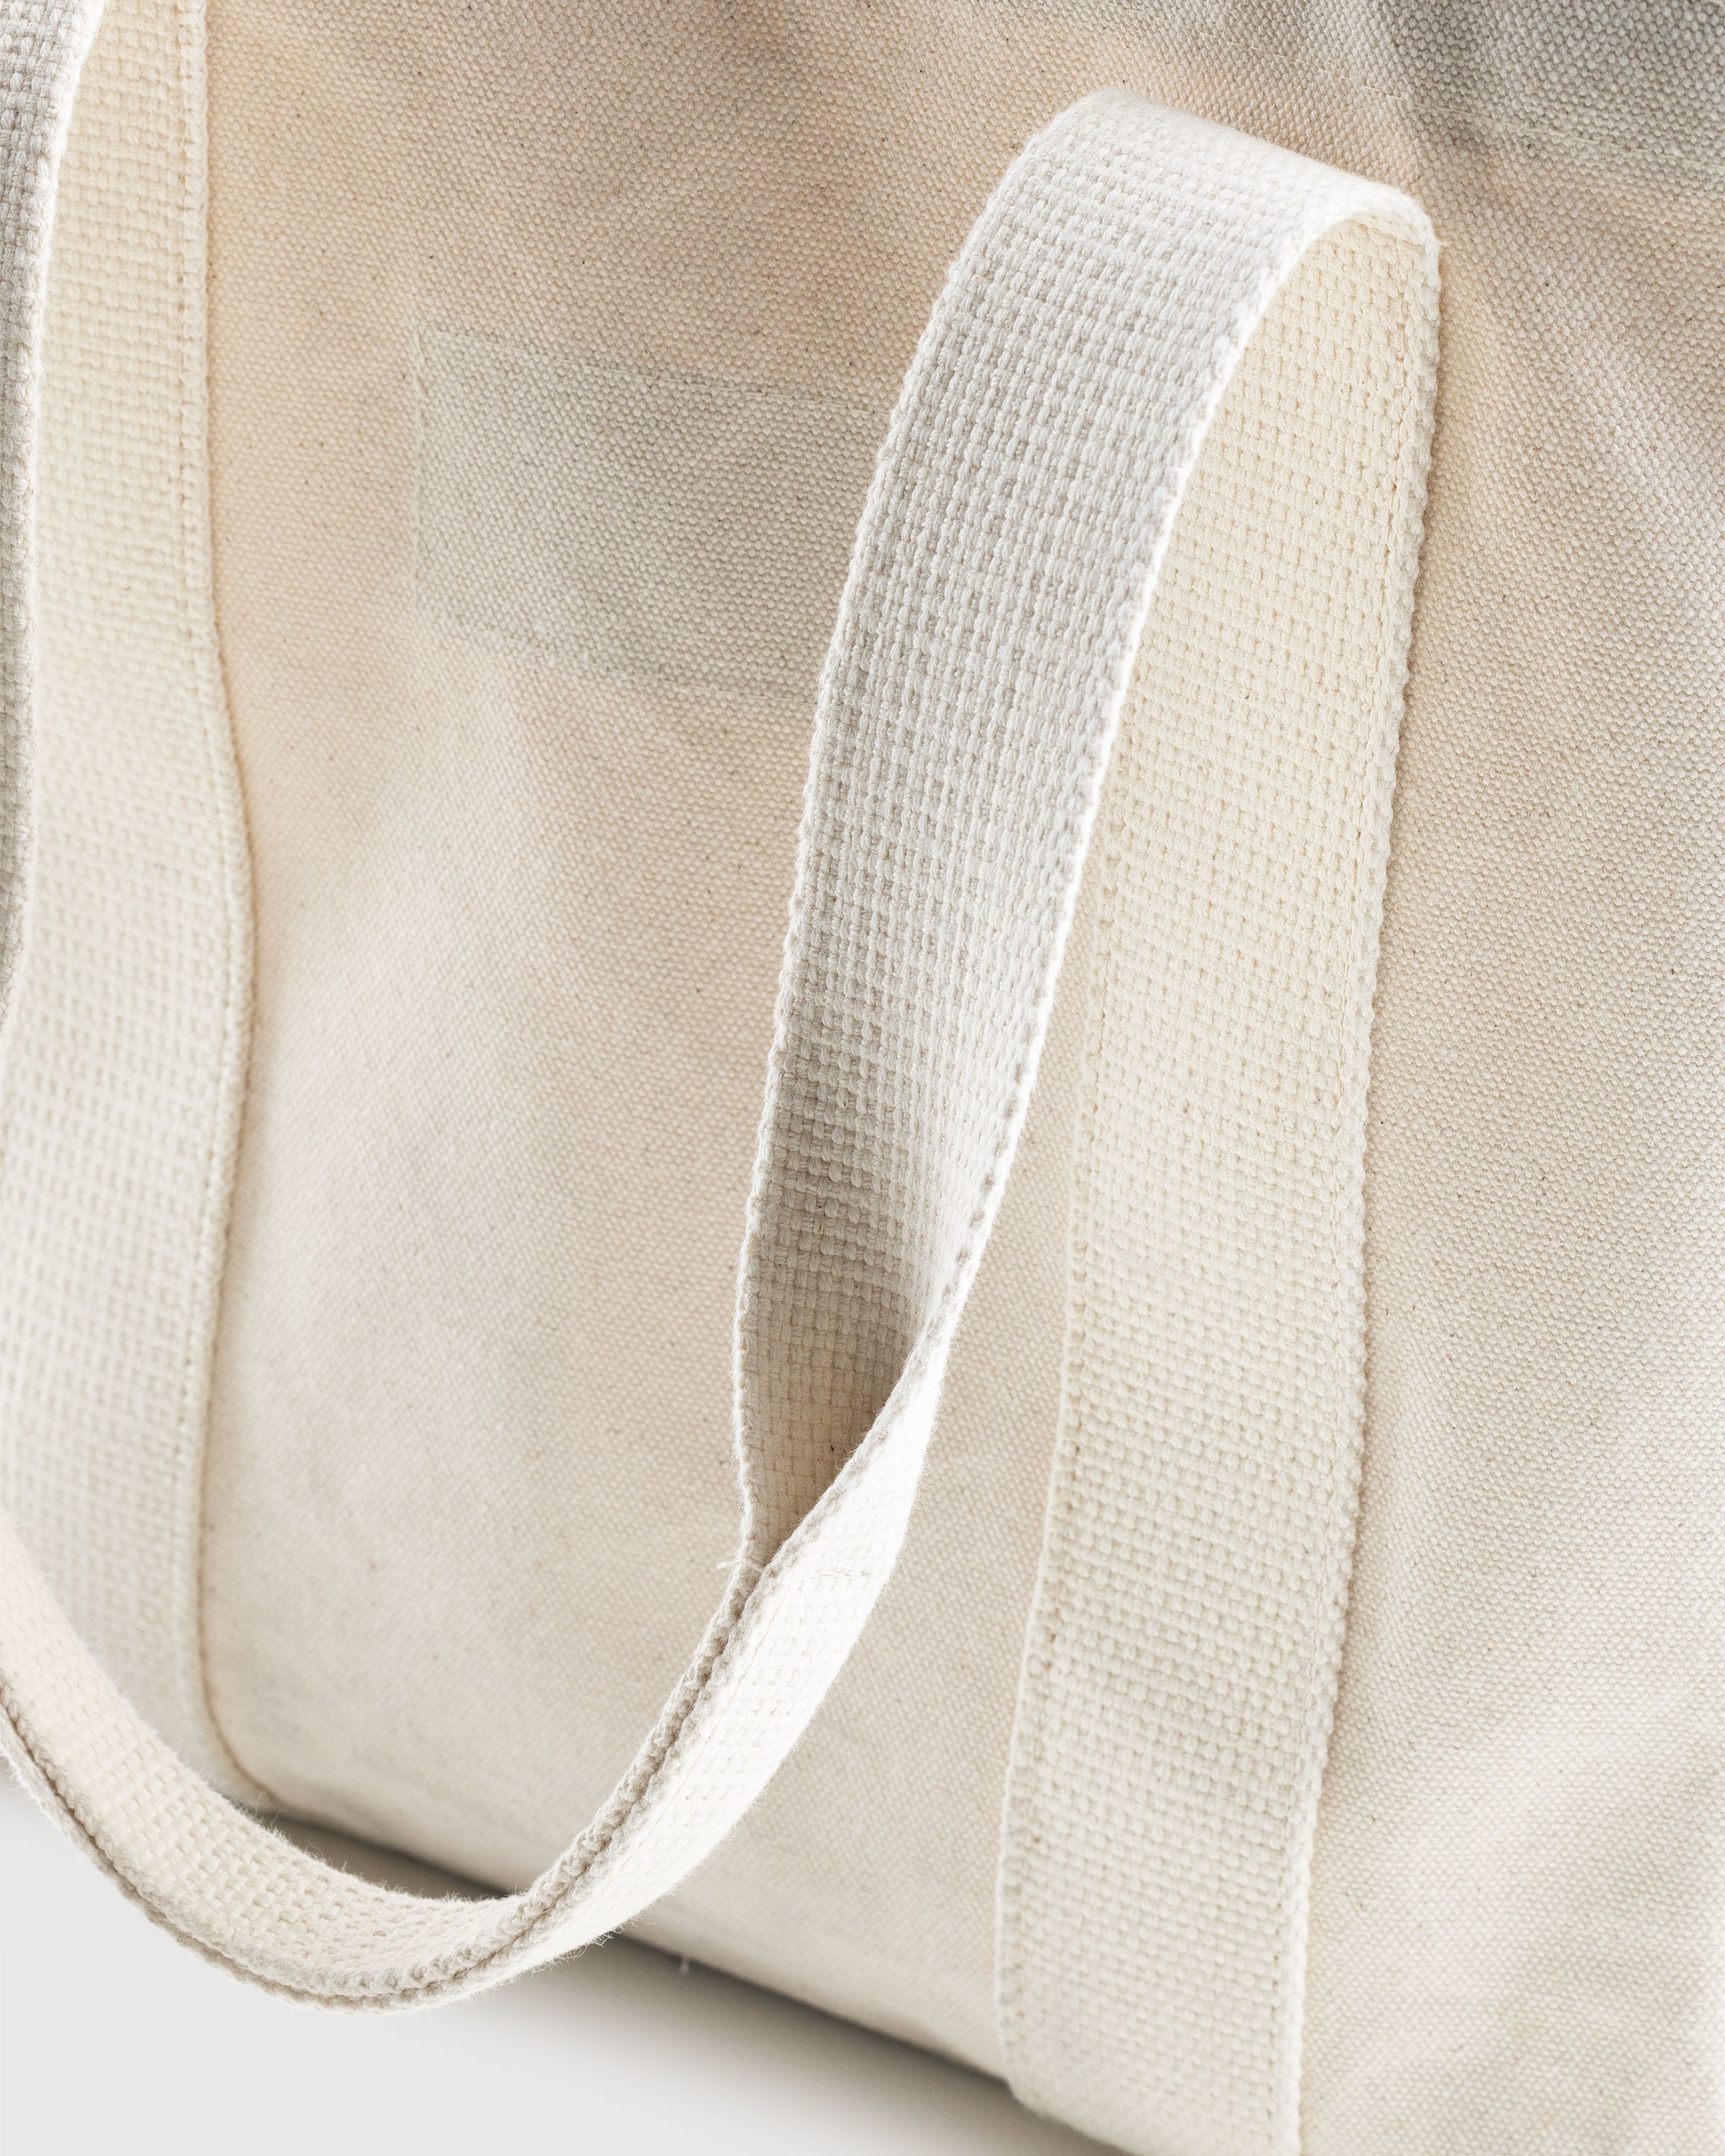 NTS x Highsnobiety - Record Storage Canvas Bag Natural - Accessories - Natural - Image 5